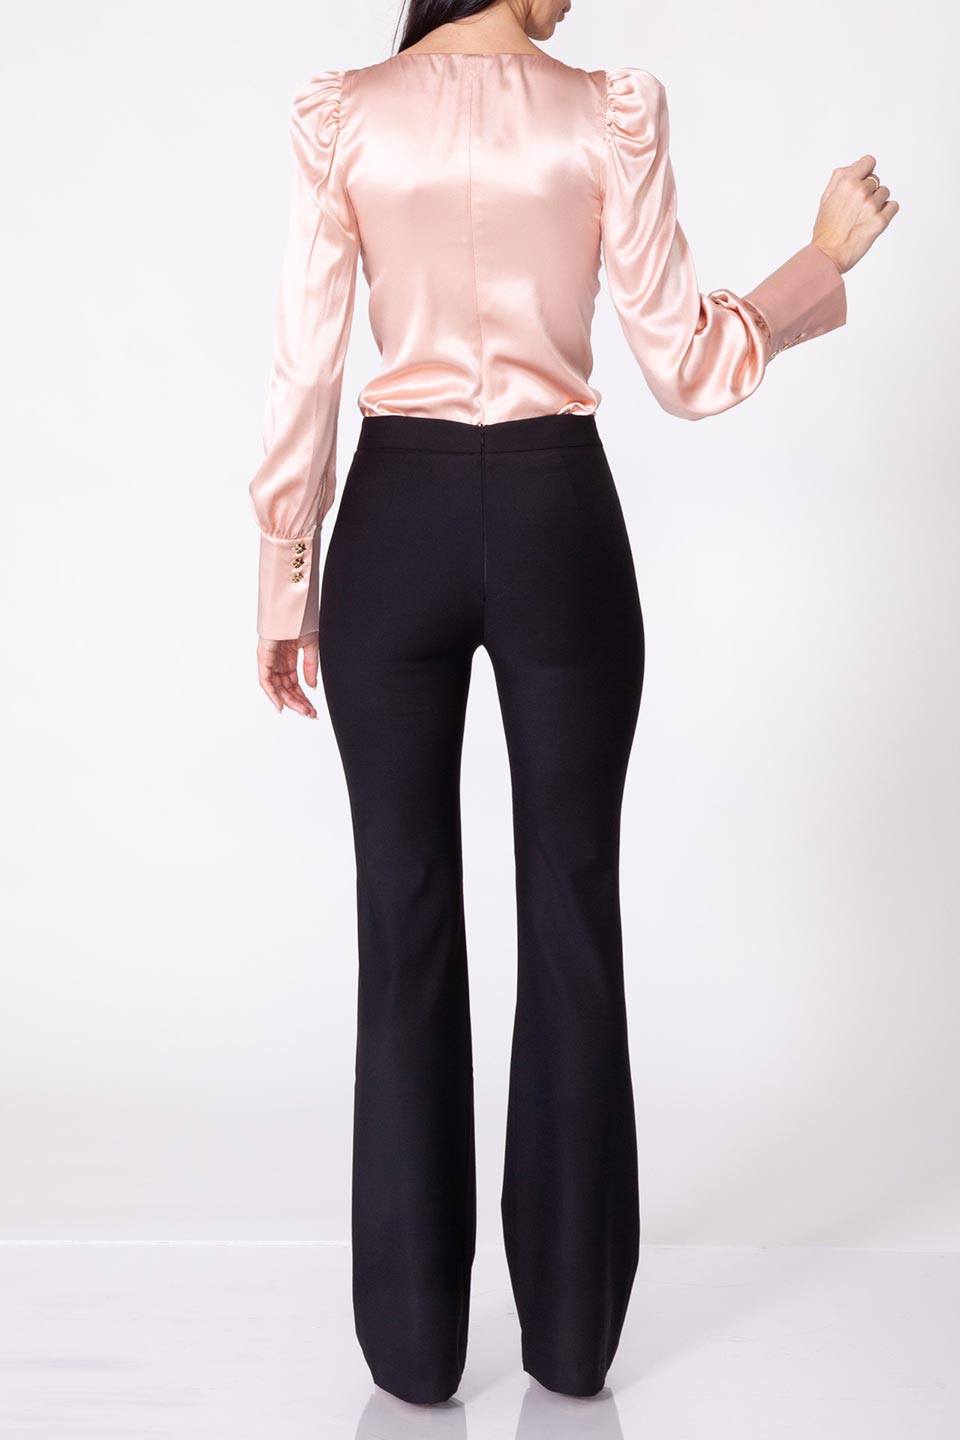 Thumbnail for Product gallery 7, Violante nessi morandi blouse pink back